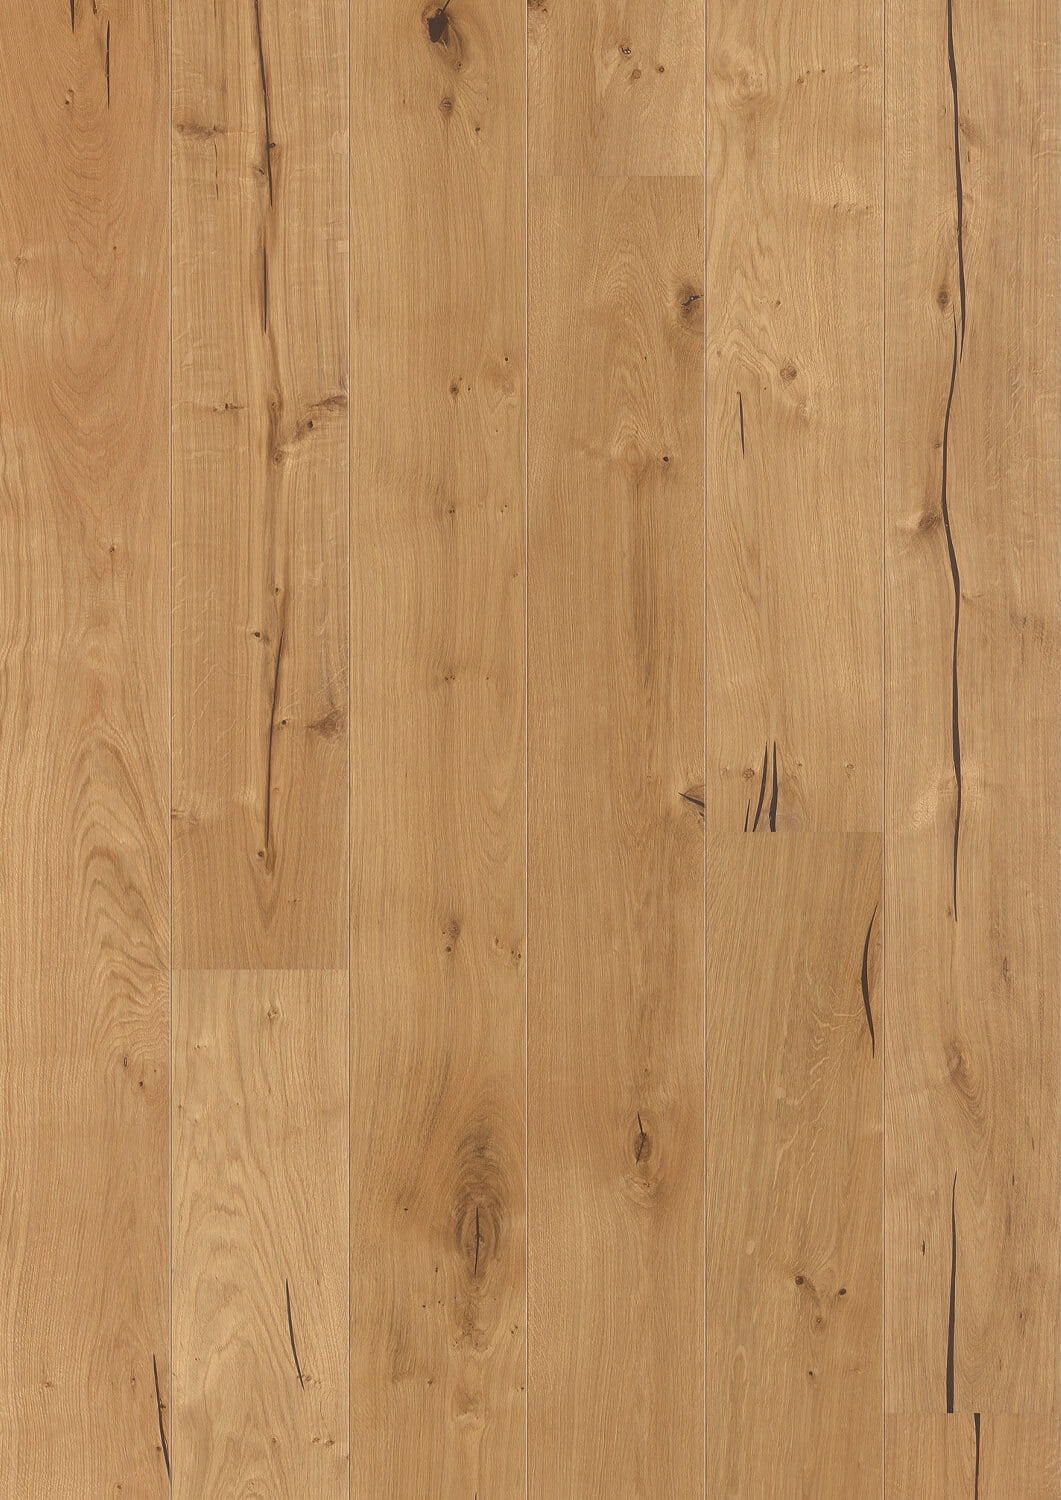 two-layer parquet flooring plank oak oiled